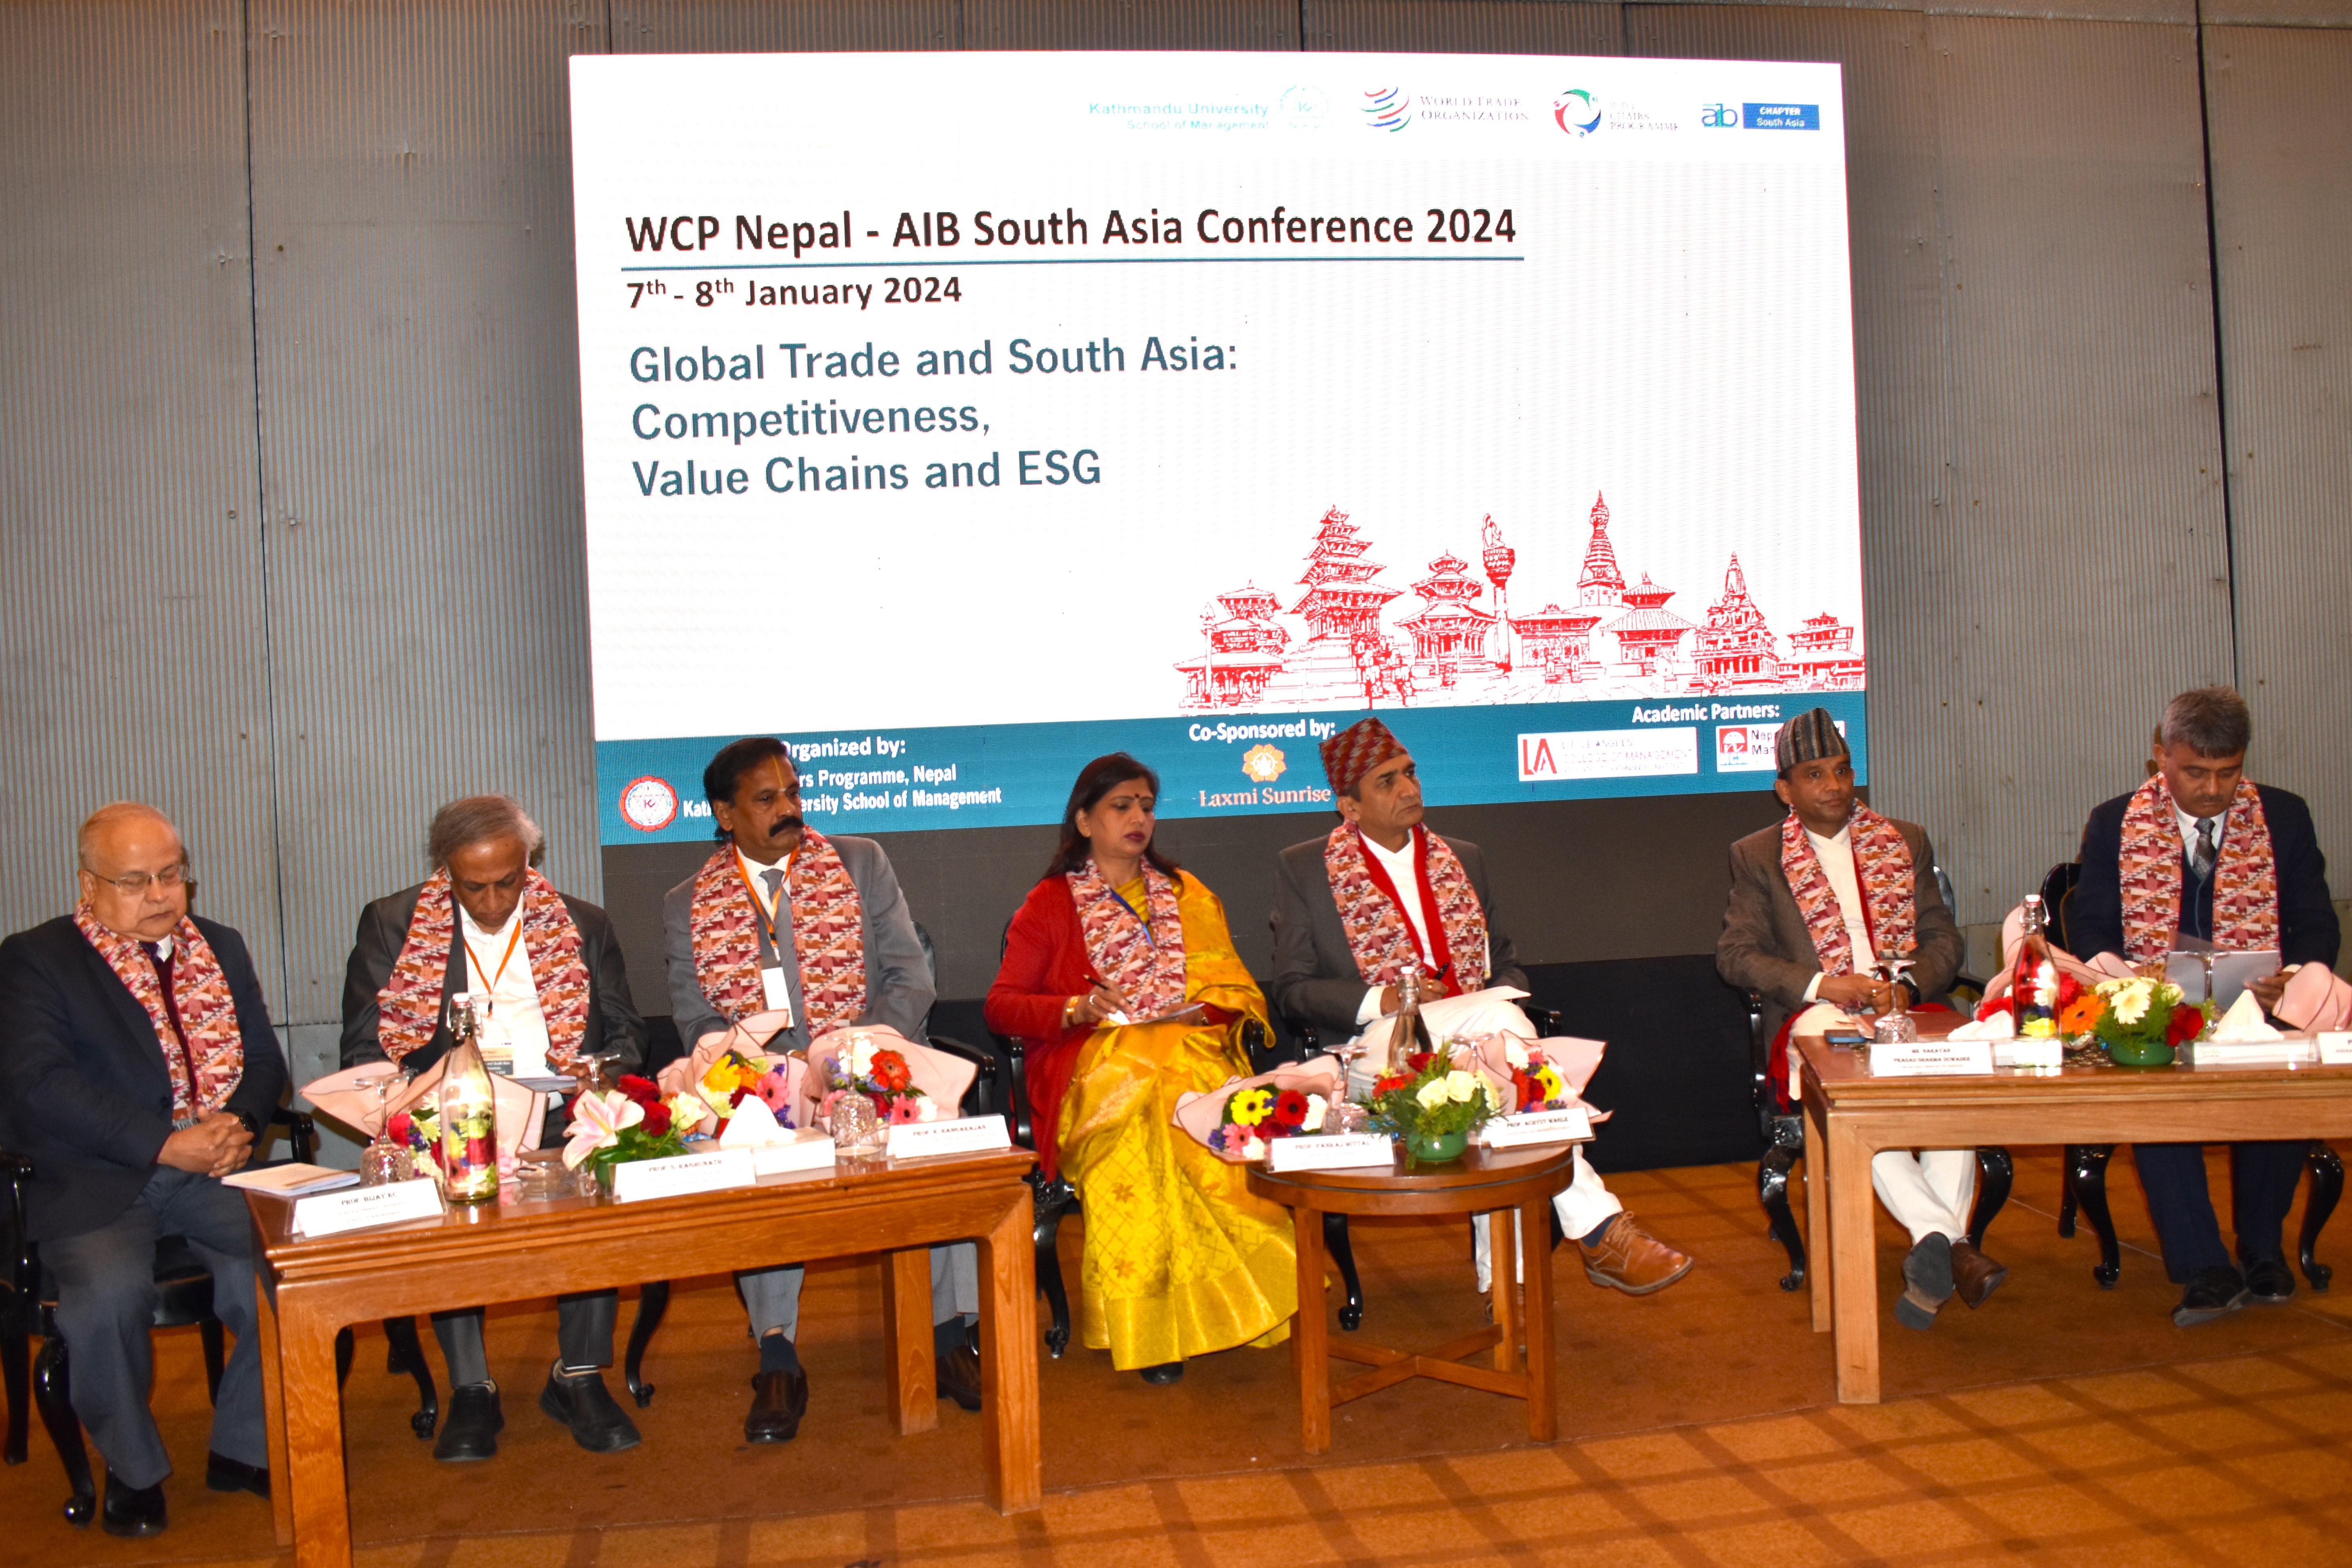 Experts discuss competitiveness, value chains and ESG at WCP Nepal-AIB South Asia Conference